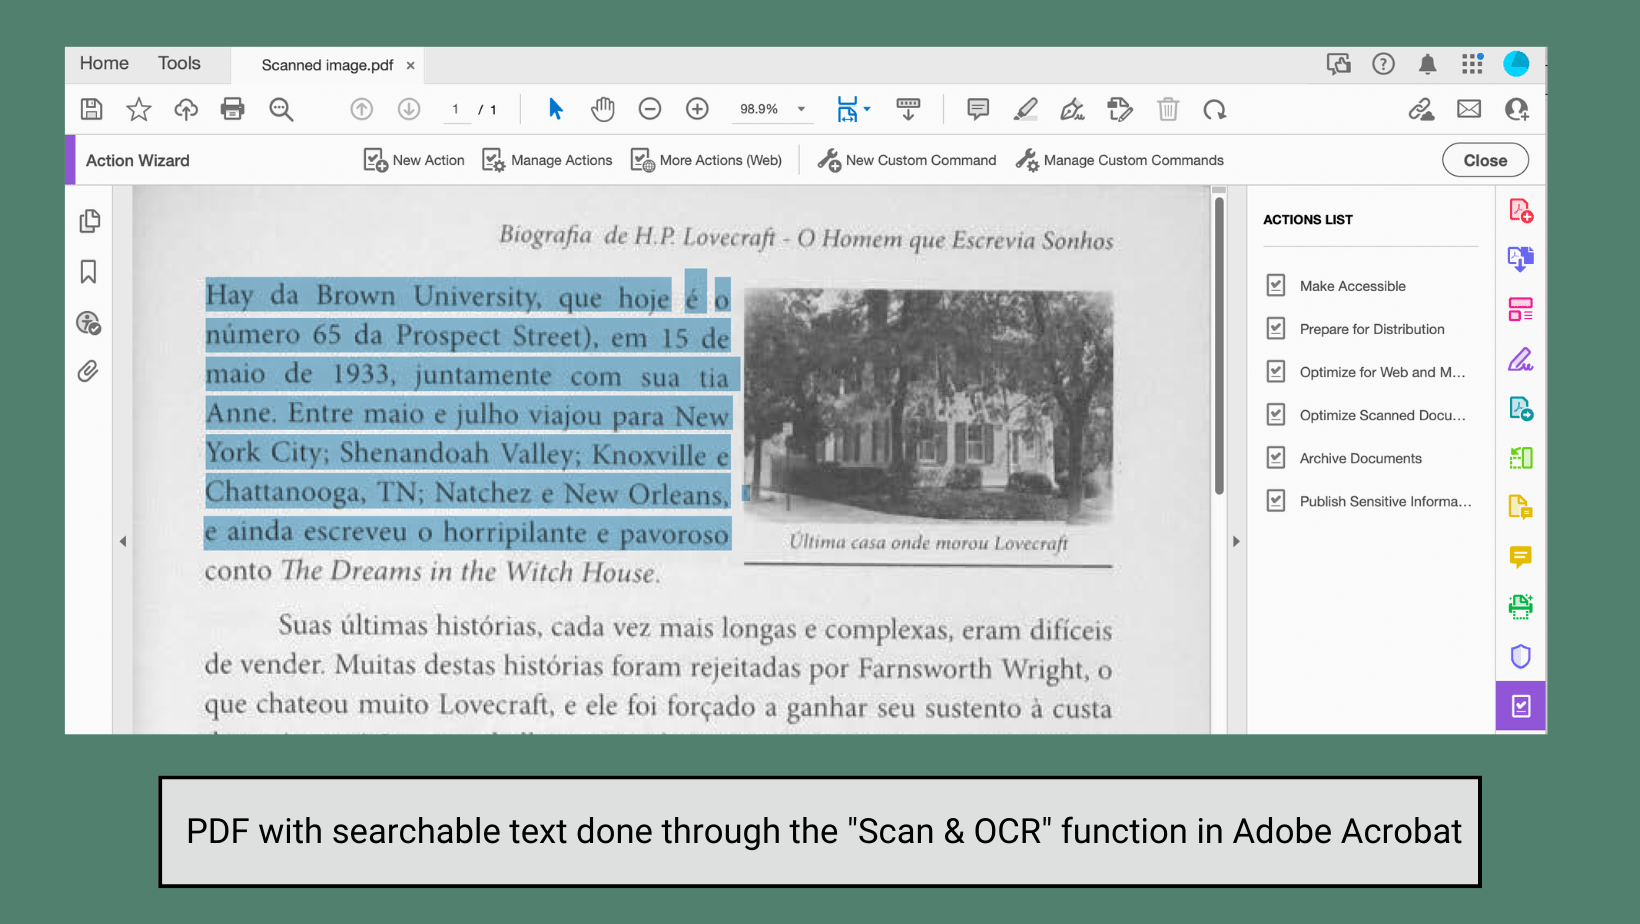 Screenshot of a scanned image of a book page in Adobe Acrobat. Blue highlight overlays a paragraph showing each word is scannable. Below the image, there is a text box that reads 'PDF with searchable text done through the Scan & OCR function in Adobe Acrobat.'